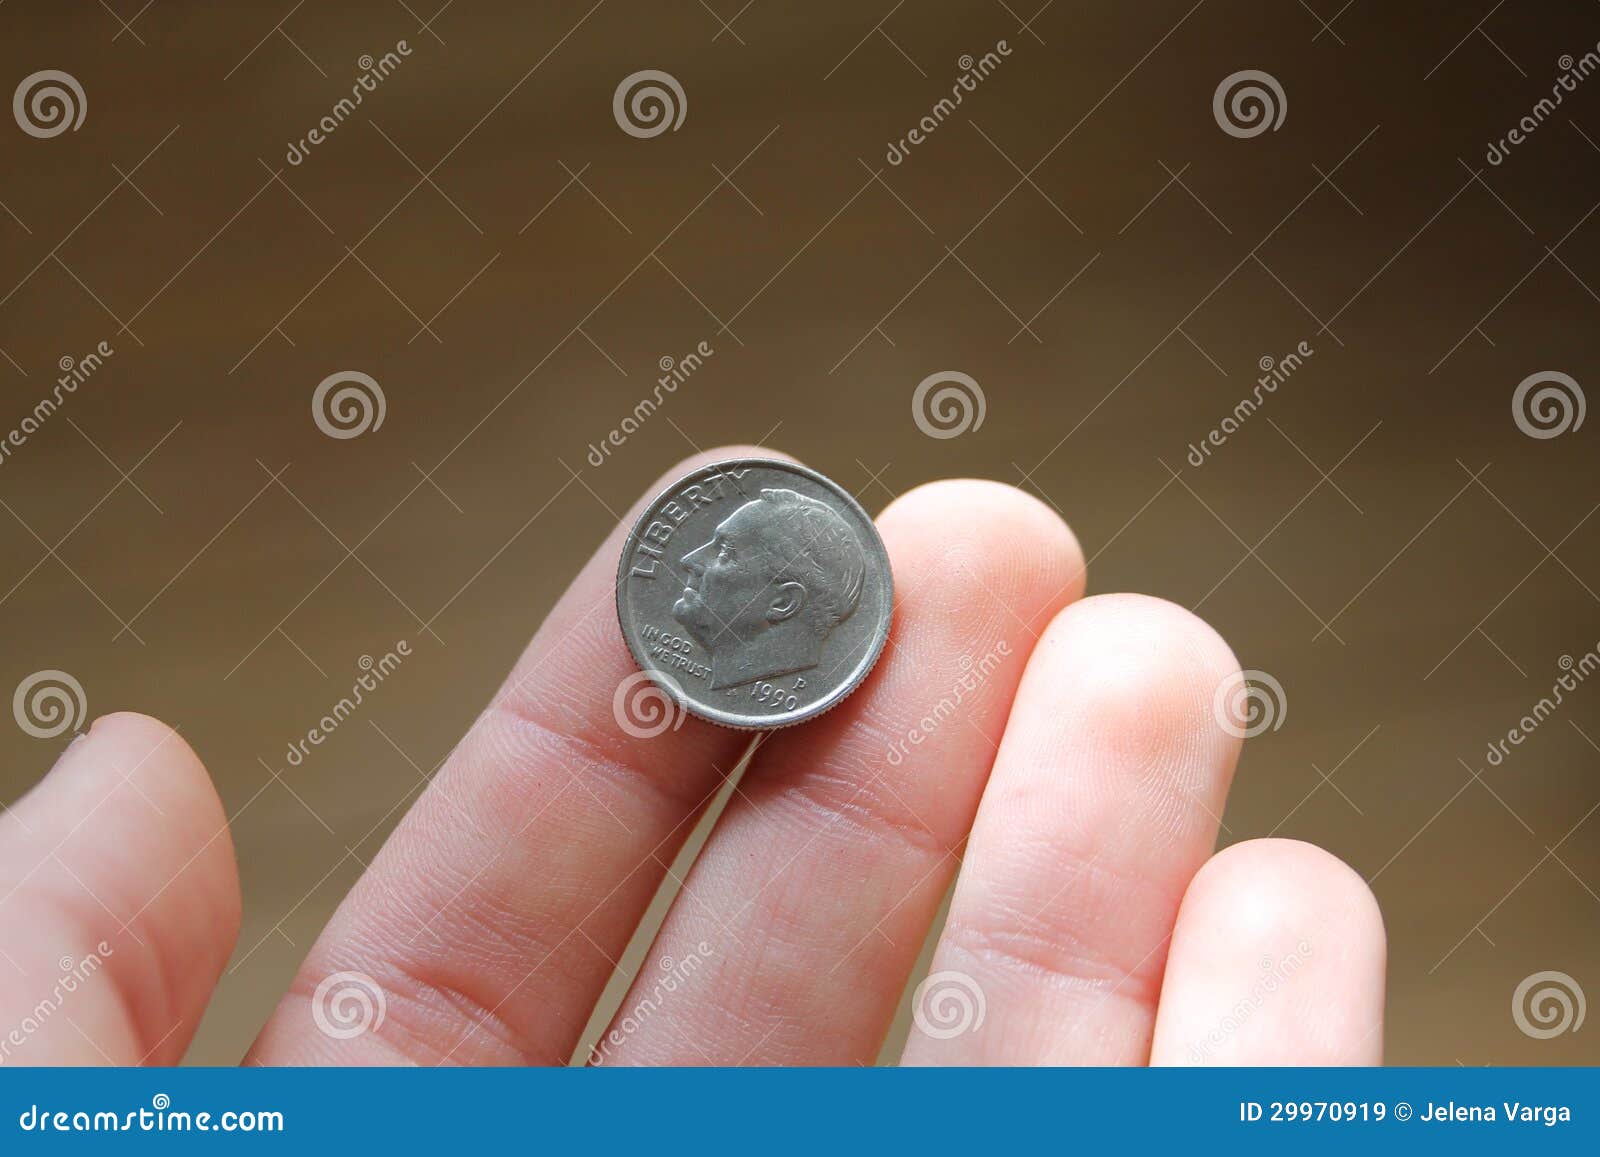 one dime in hand